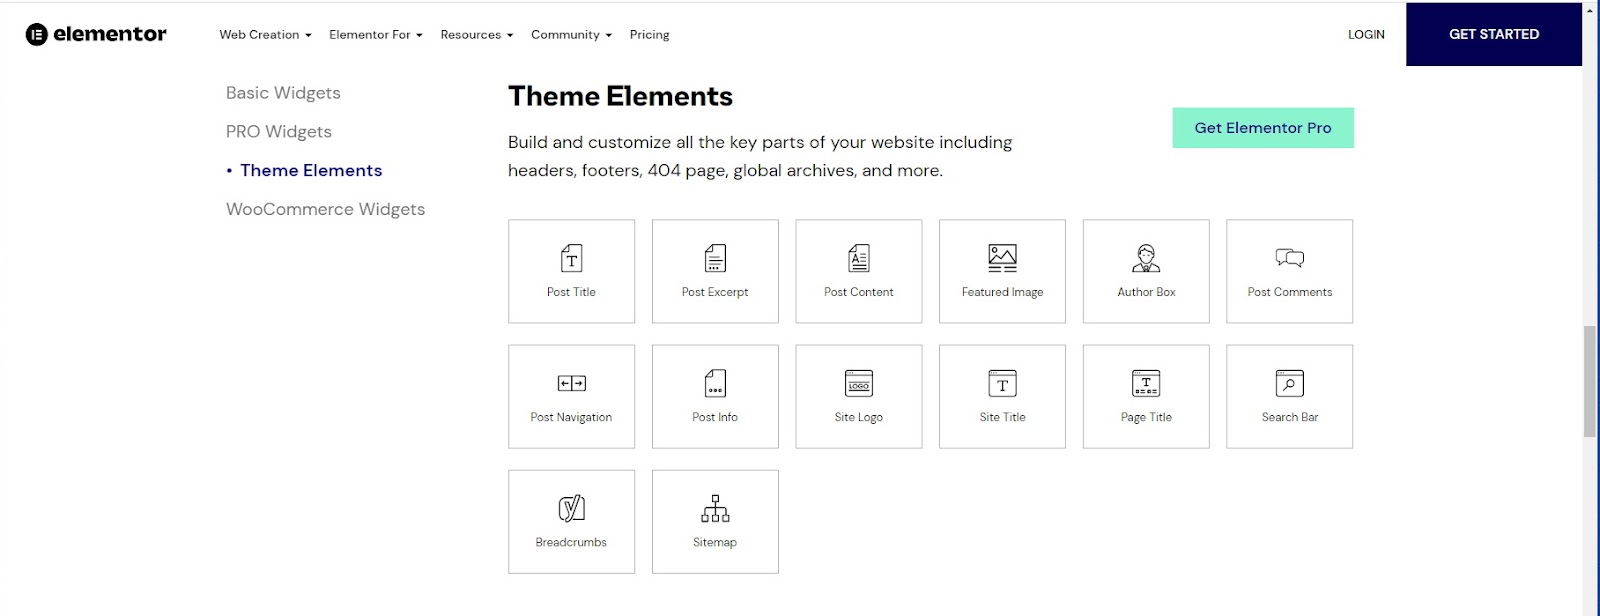 Screenshot showing some of the Theme Element widgets available through your Elementor Pro plugin.